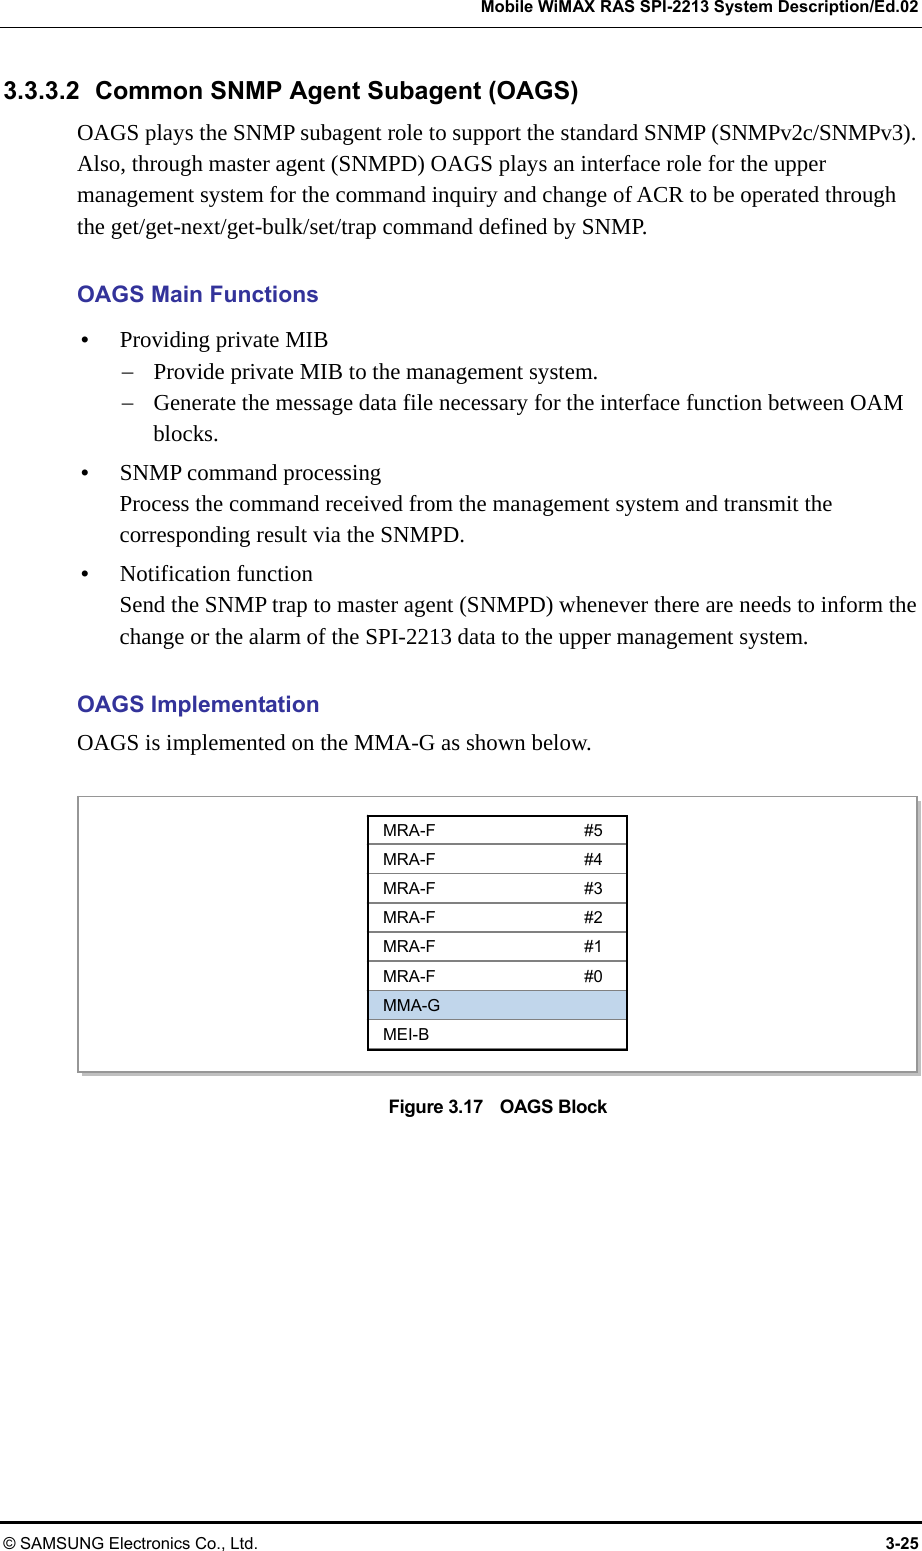   Mobile WiMAX RAS SPI-2213 System Description/Ed.02 © SAMSUNG Electronics Co., Ltd.  3-25 3.3.3.2  Common SNMP Agent Subagent (OAGS) OAGS plays the SNMP subagent role to support the standard SNMP (SNMPv2c/SNMPv3). Also, through master agent (SNMPD) OAGS plays an interface role for the upper management system for the command inquiry and change of ACR to be operated through the get/get-next/get-bulk/set/trap command defined by SNMP.  OAGS Main Functions y Providing private MIB − Provide private MIB to the management system. − Generate the message data file necessary for the interface function between OAM blocks. y SNMP command processing Process the command received from the management system and transmit the corresponding result via the SNMPD. y Notification function Send the SNMP trap to master agent (SNMPD) whenever there are needs to inform the change or the alarm of the SPI-2213 data to the upper management system.  OAGS Implementation OAGS is implemented on the MMA-G as shown below.  Figure 3.17    OAGS Block MRA-F #5 MRA-F #4 MRA-F #3 MRA-F #2 MRA-F #1 MRA-F #0 MMA-G MEI-B